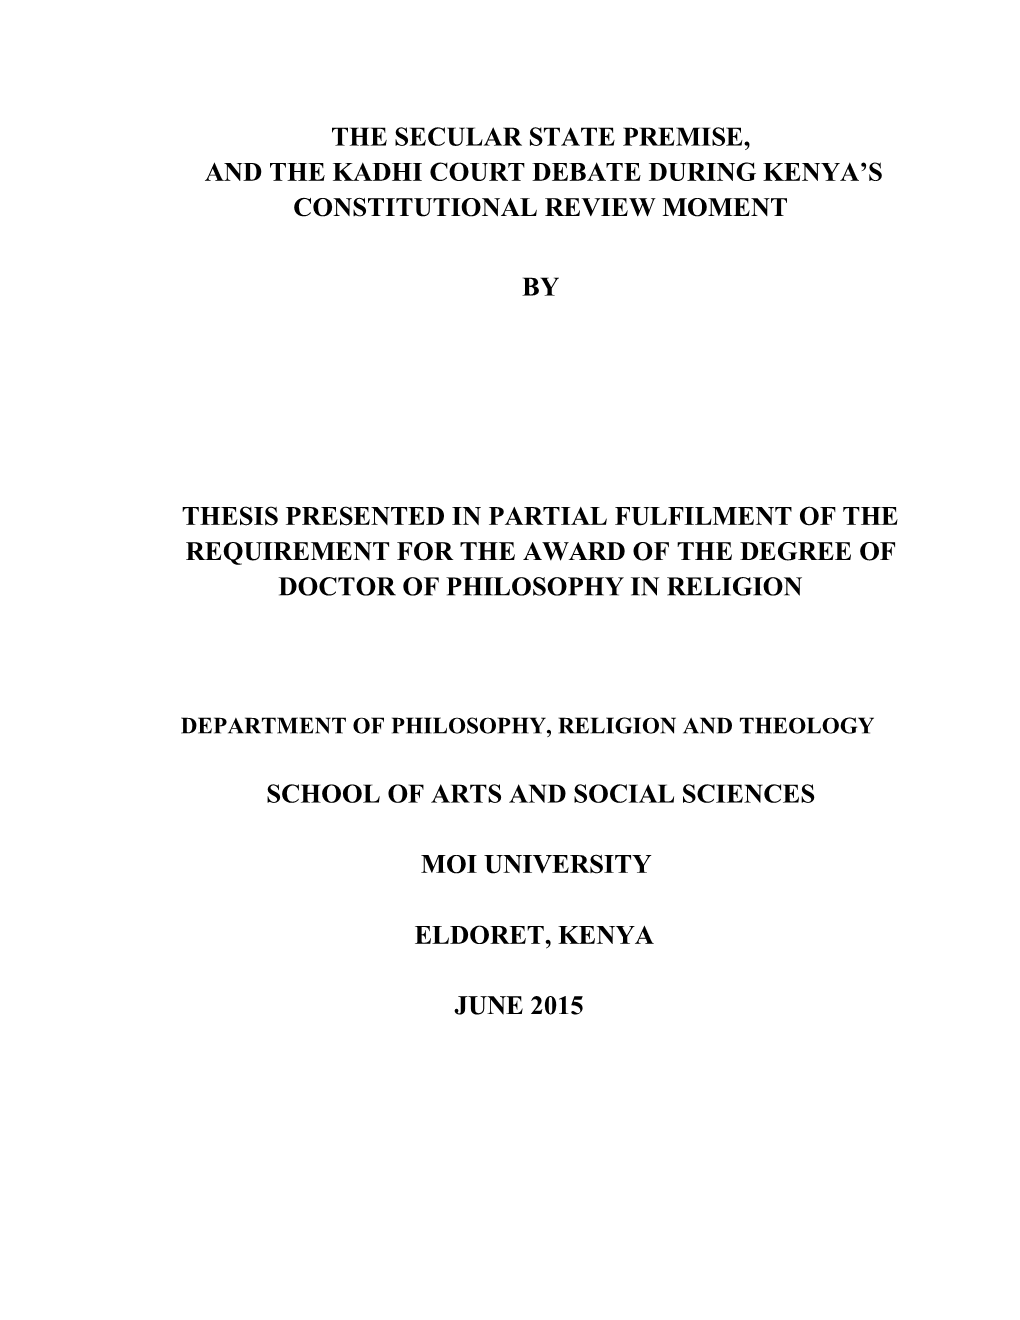 The Secular State Premise, and the Kadhi Court Debate During Kenya’S Constitutional Review Moment